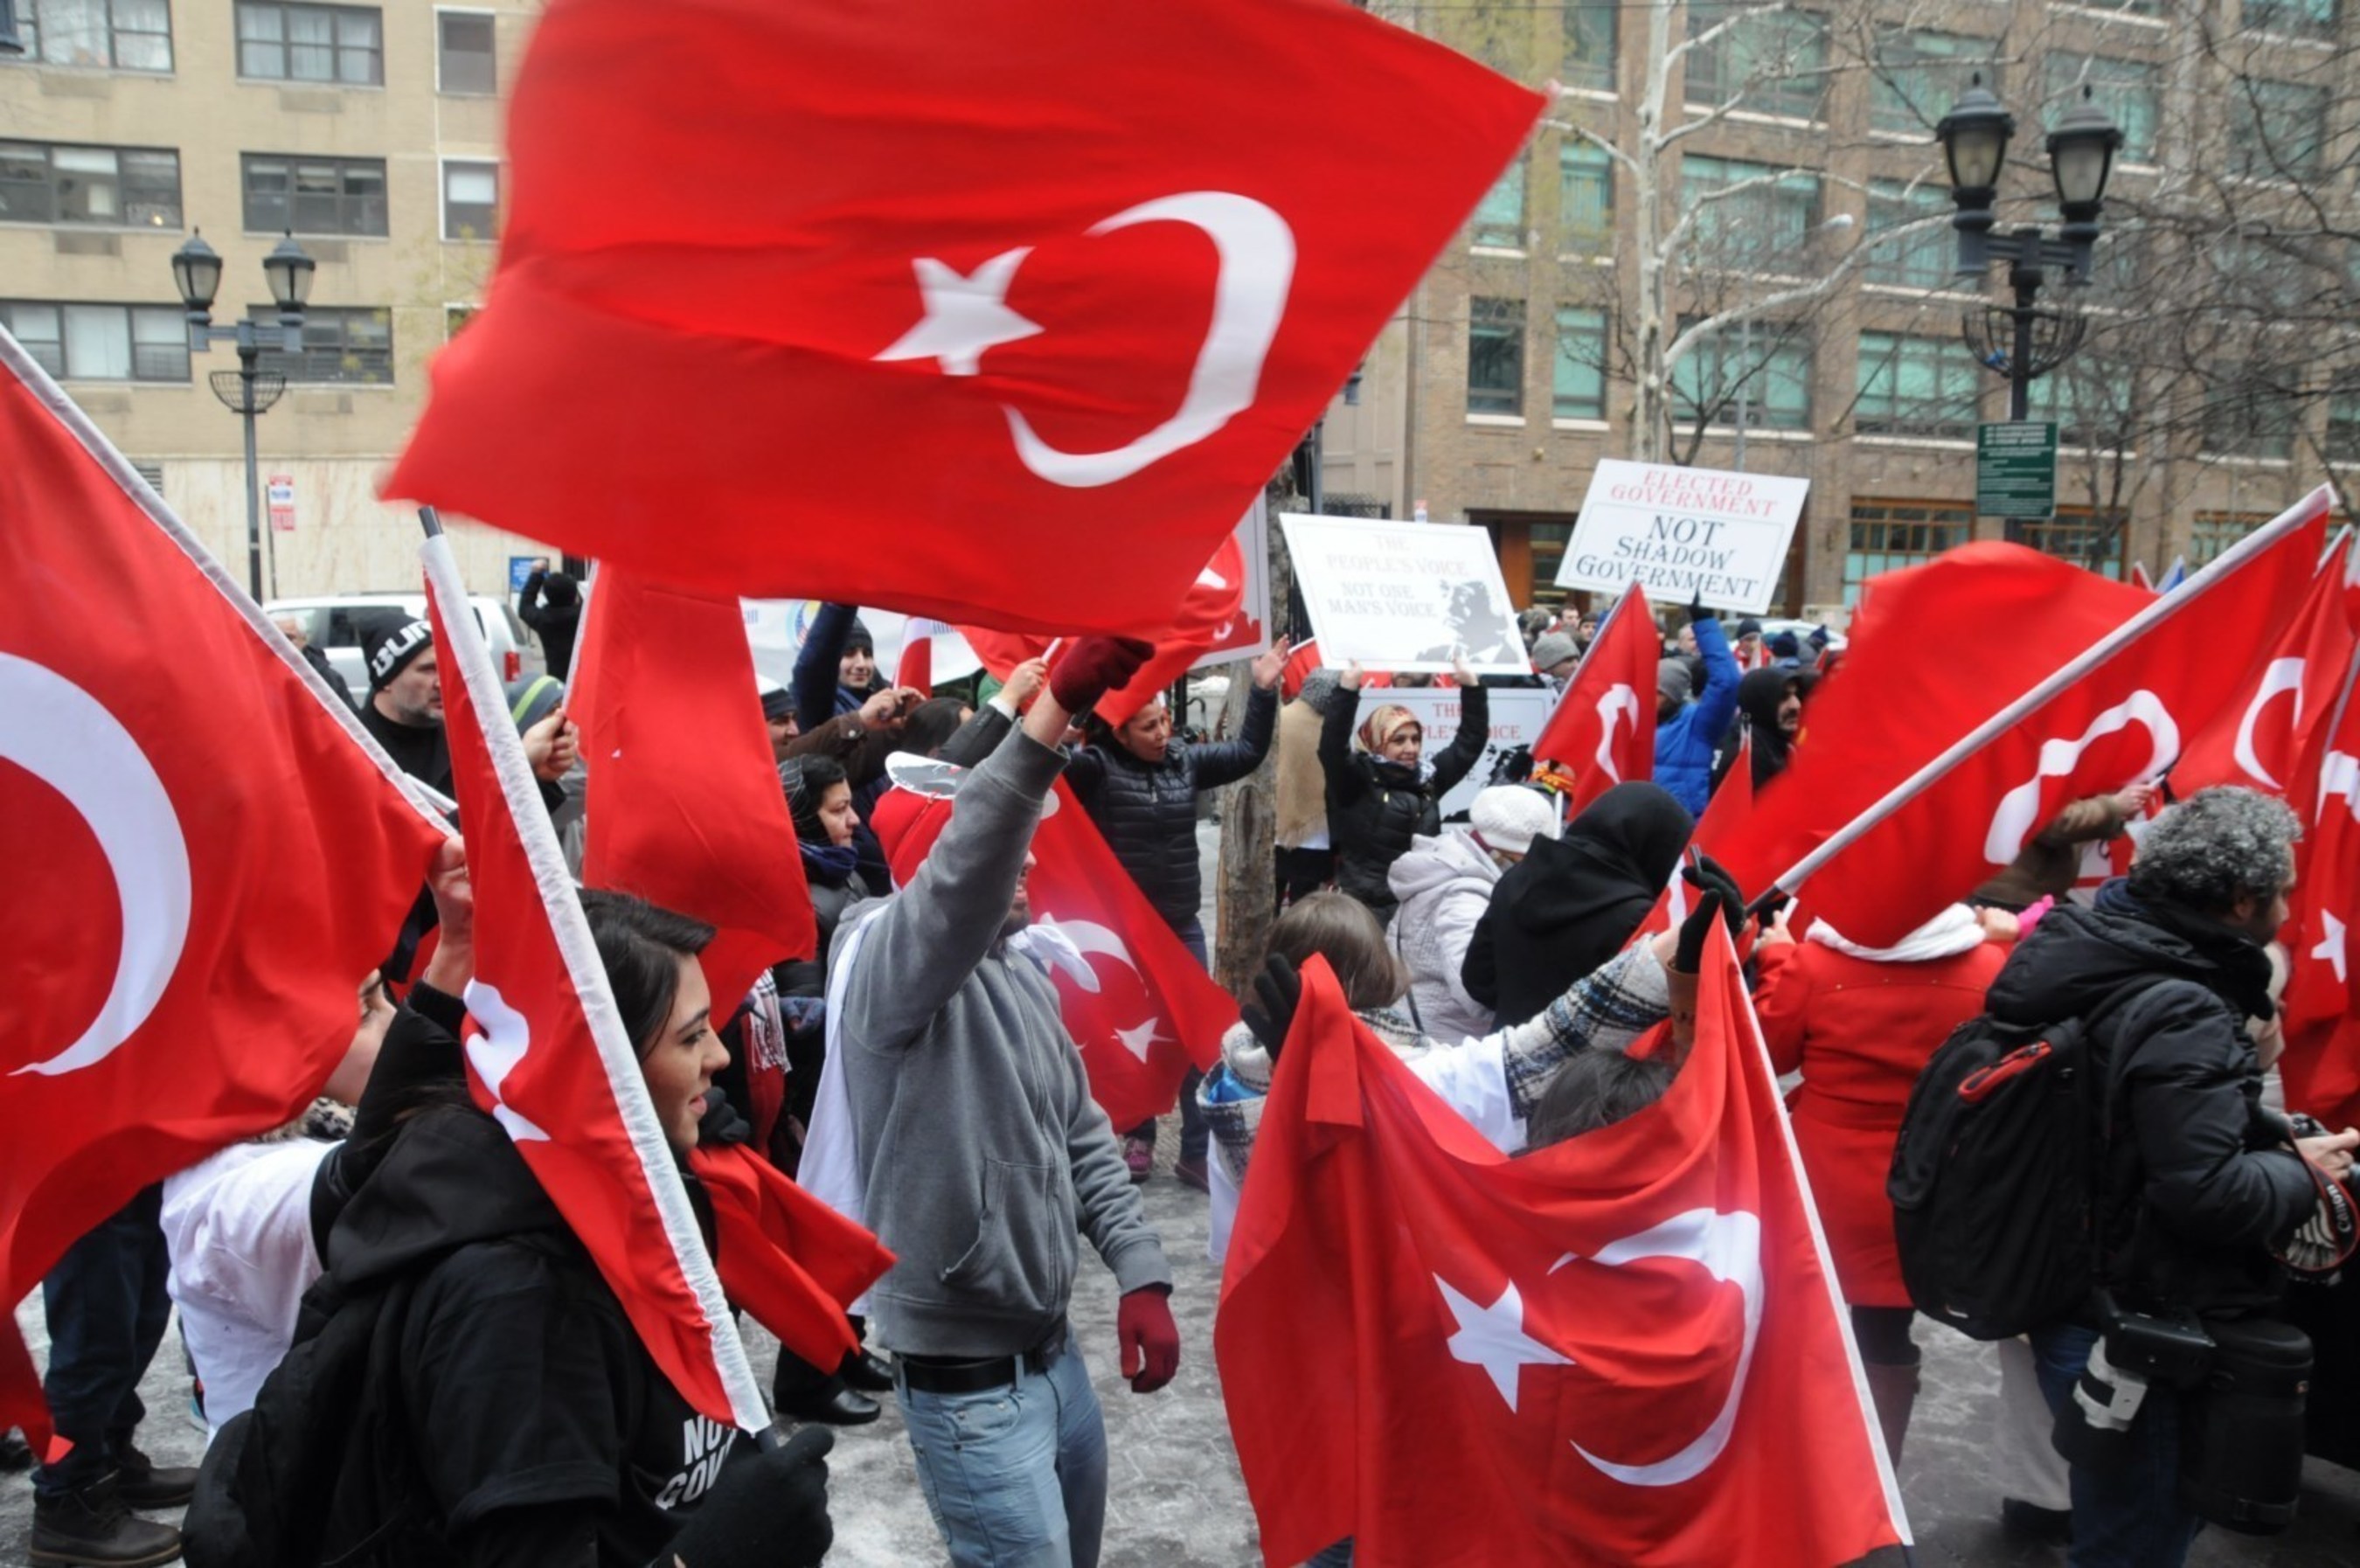 Protestors state that they are against the Gulen Movement's shadow government.